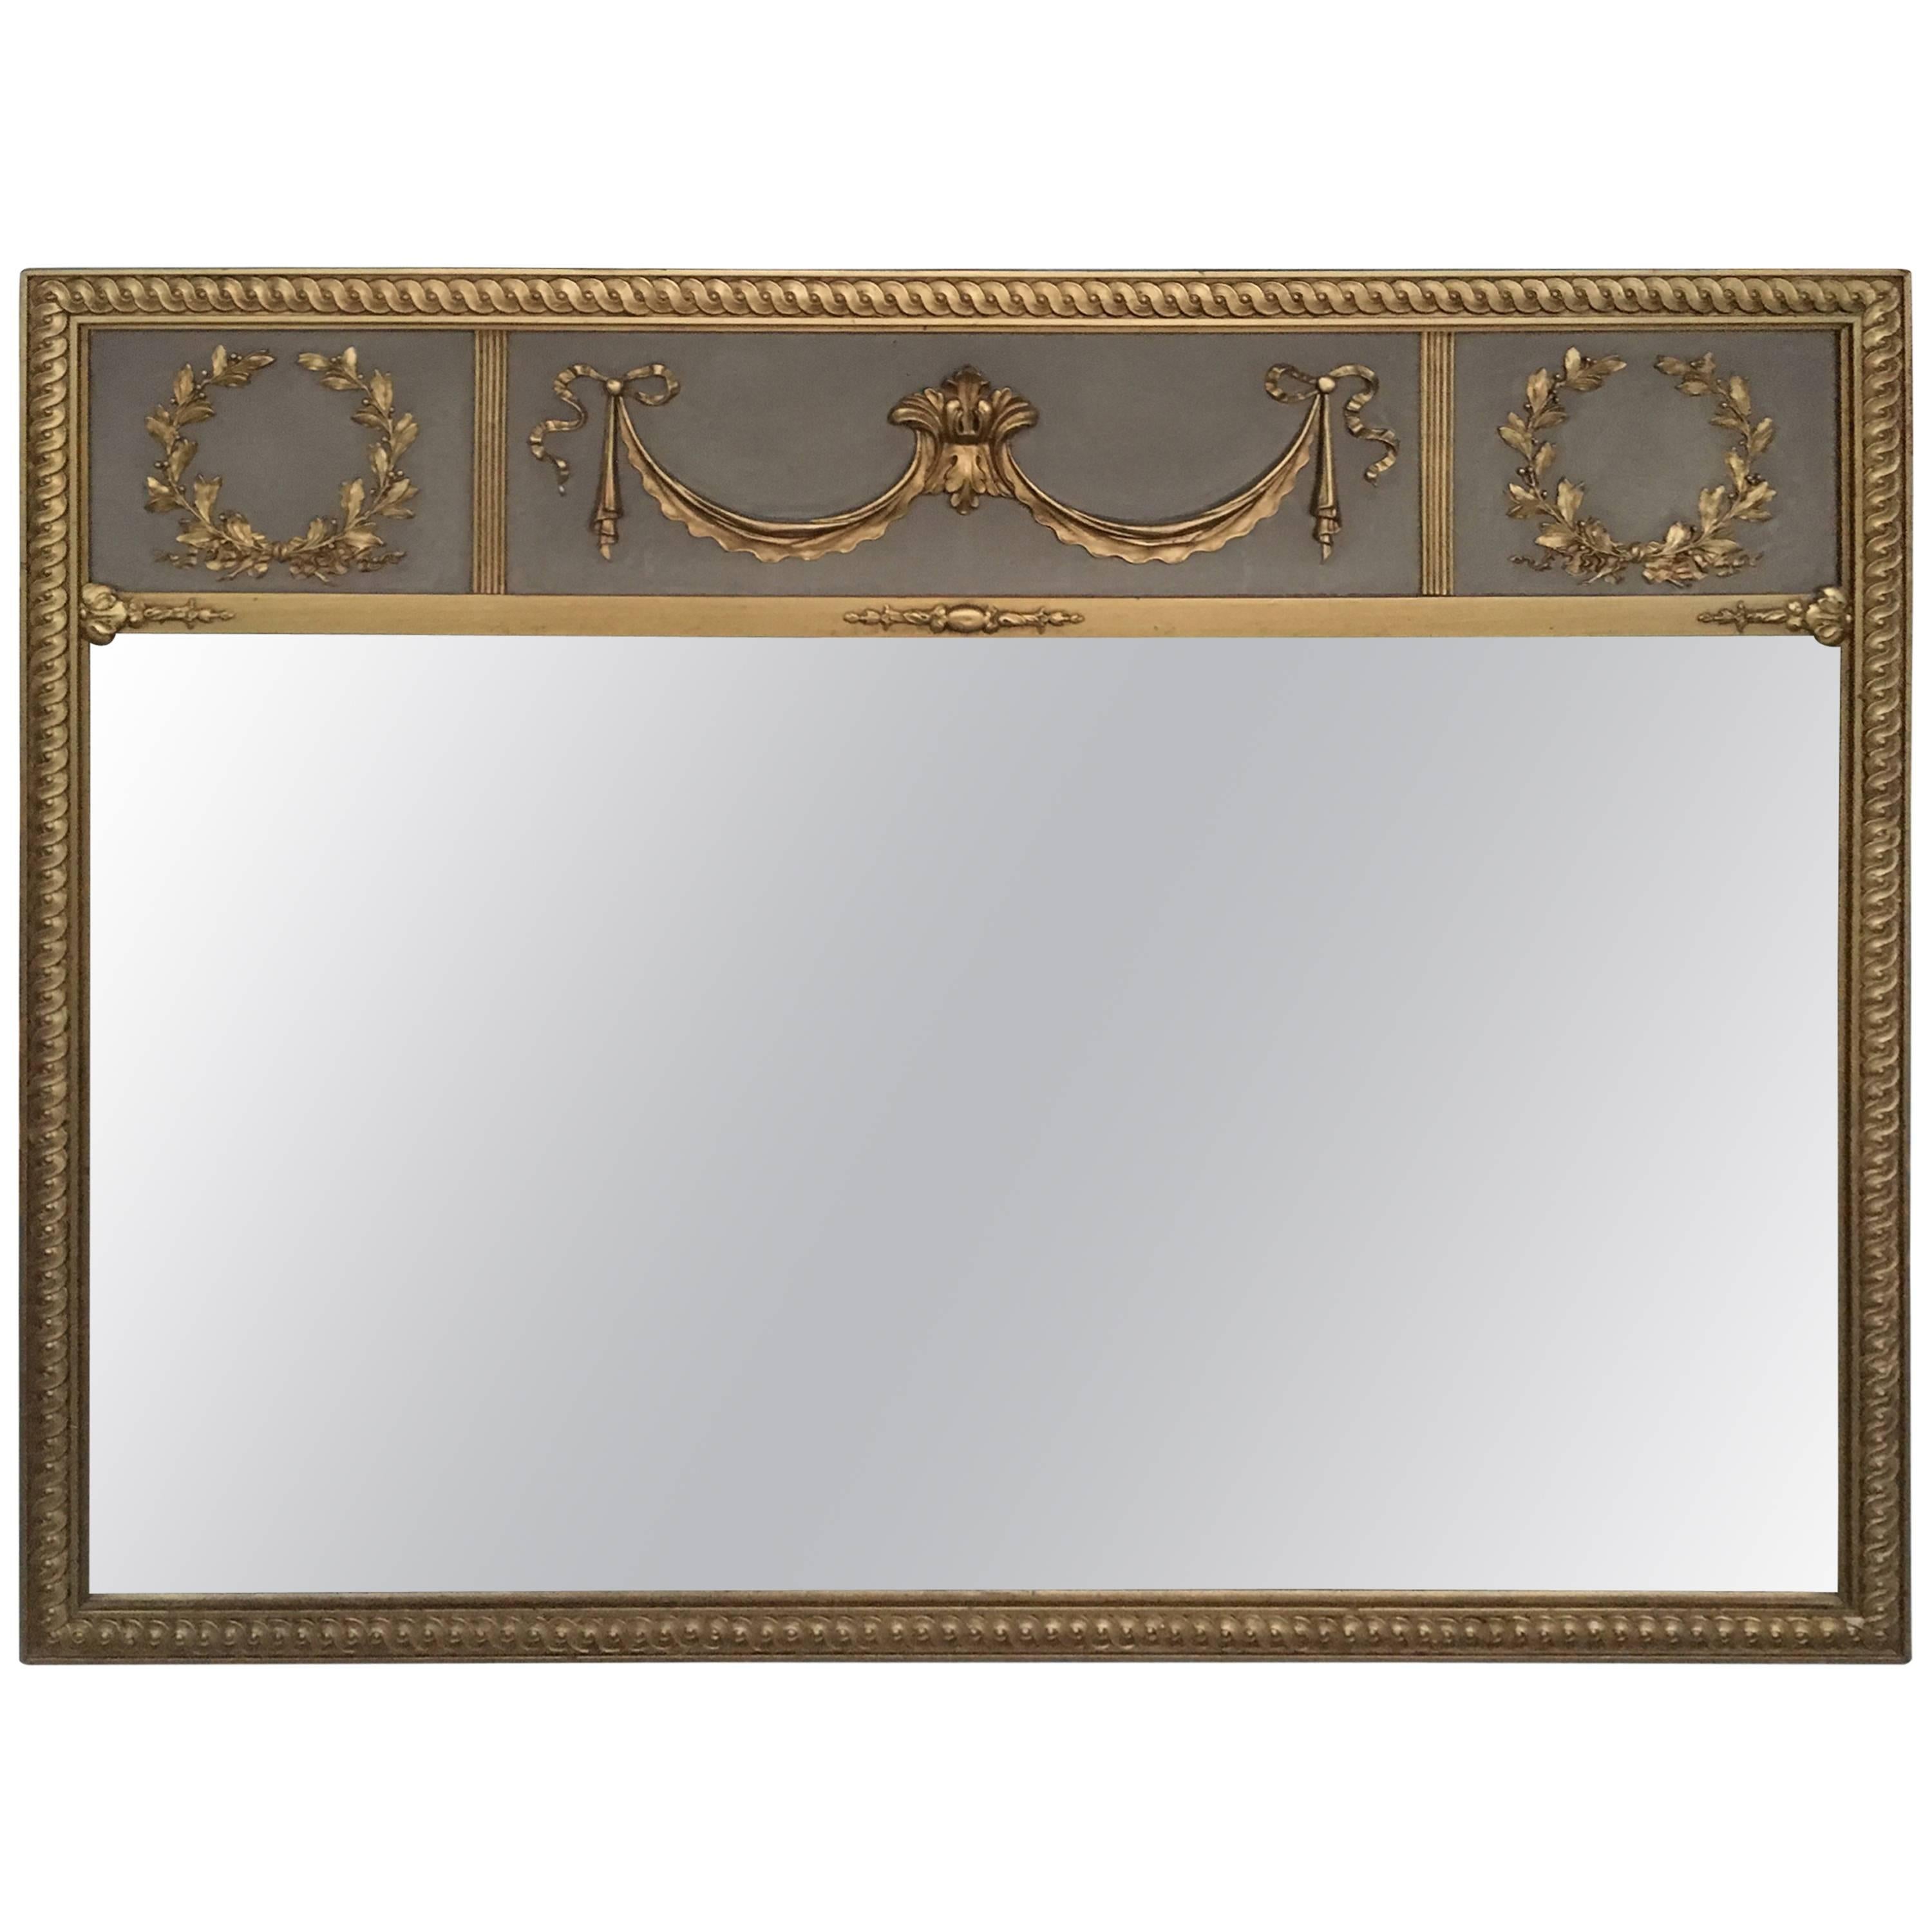 1940s French Empire Style Mirror